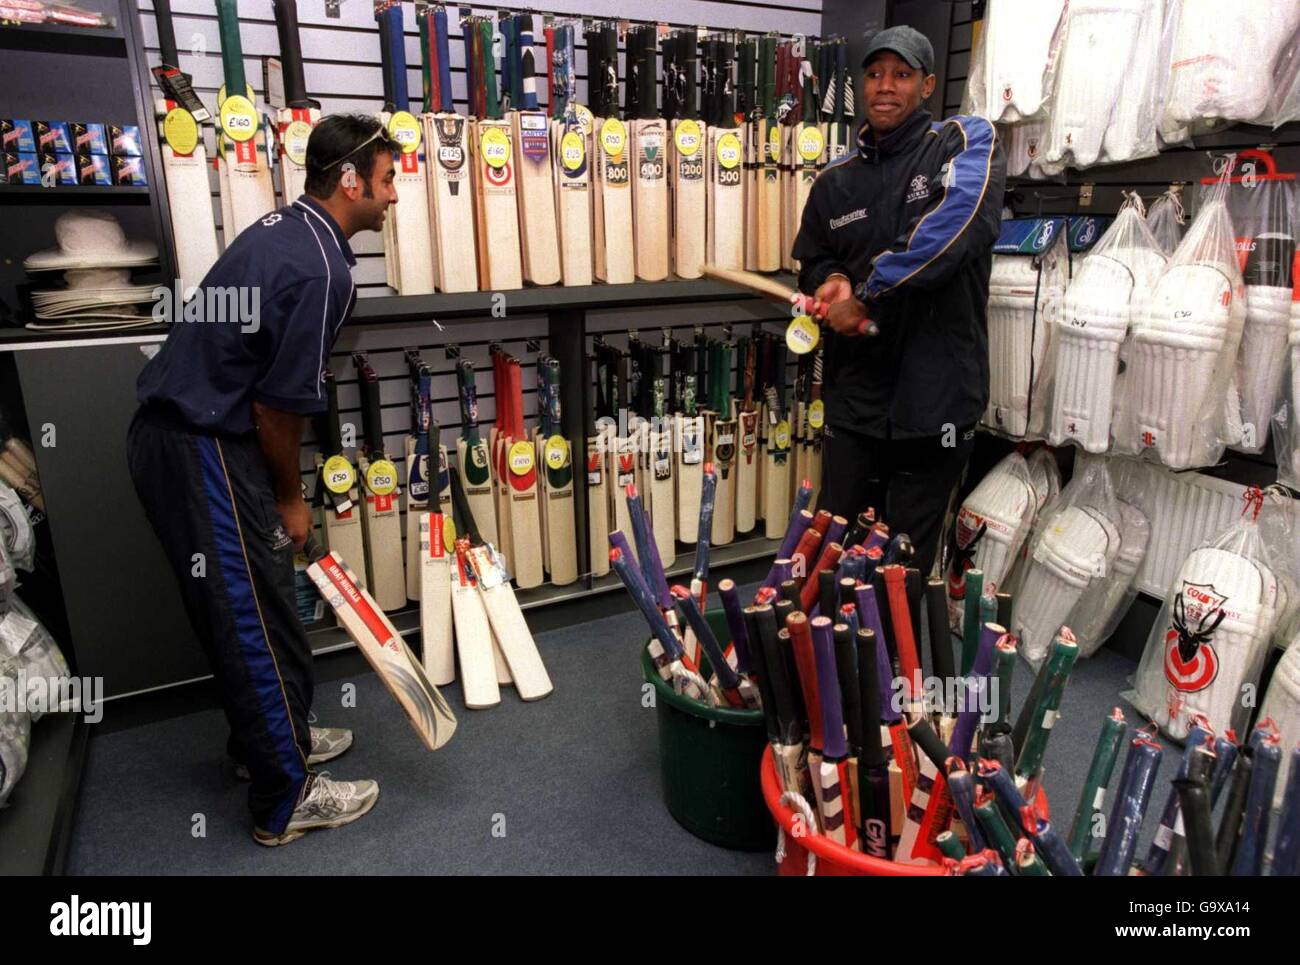 (L-R) Surrey's Nadeem Shahid and Alex Tudor try out the bats in the Centre shop Stock Photo